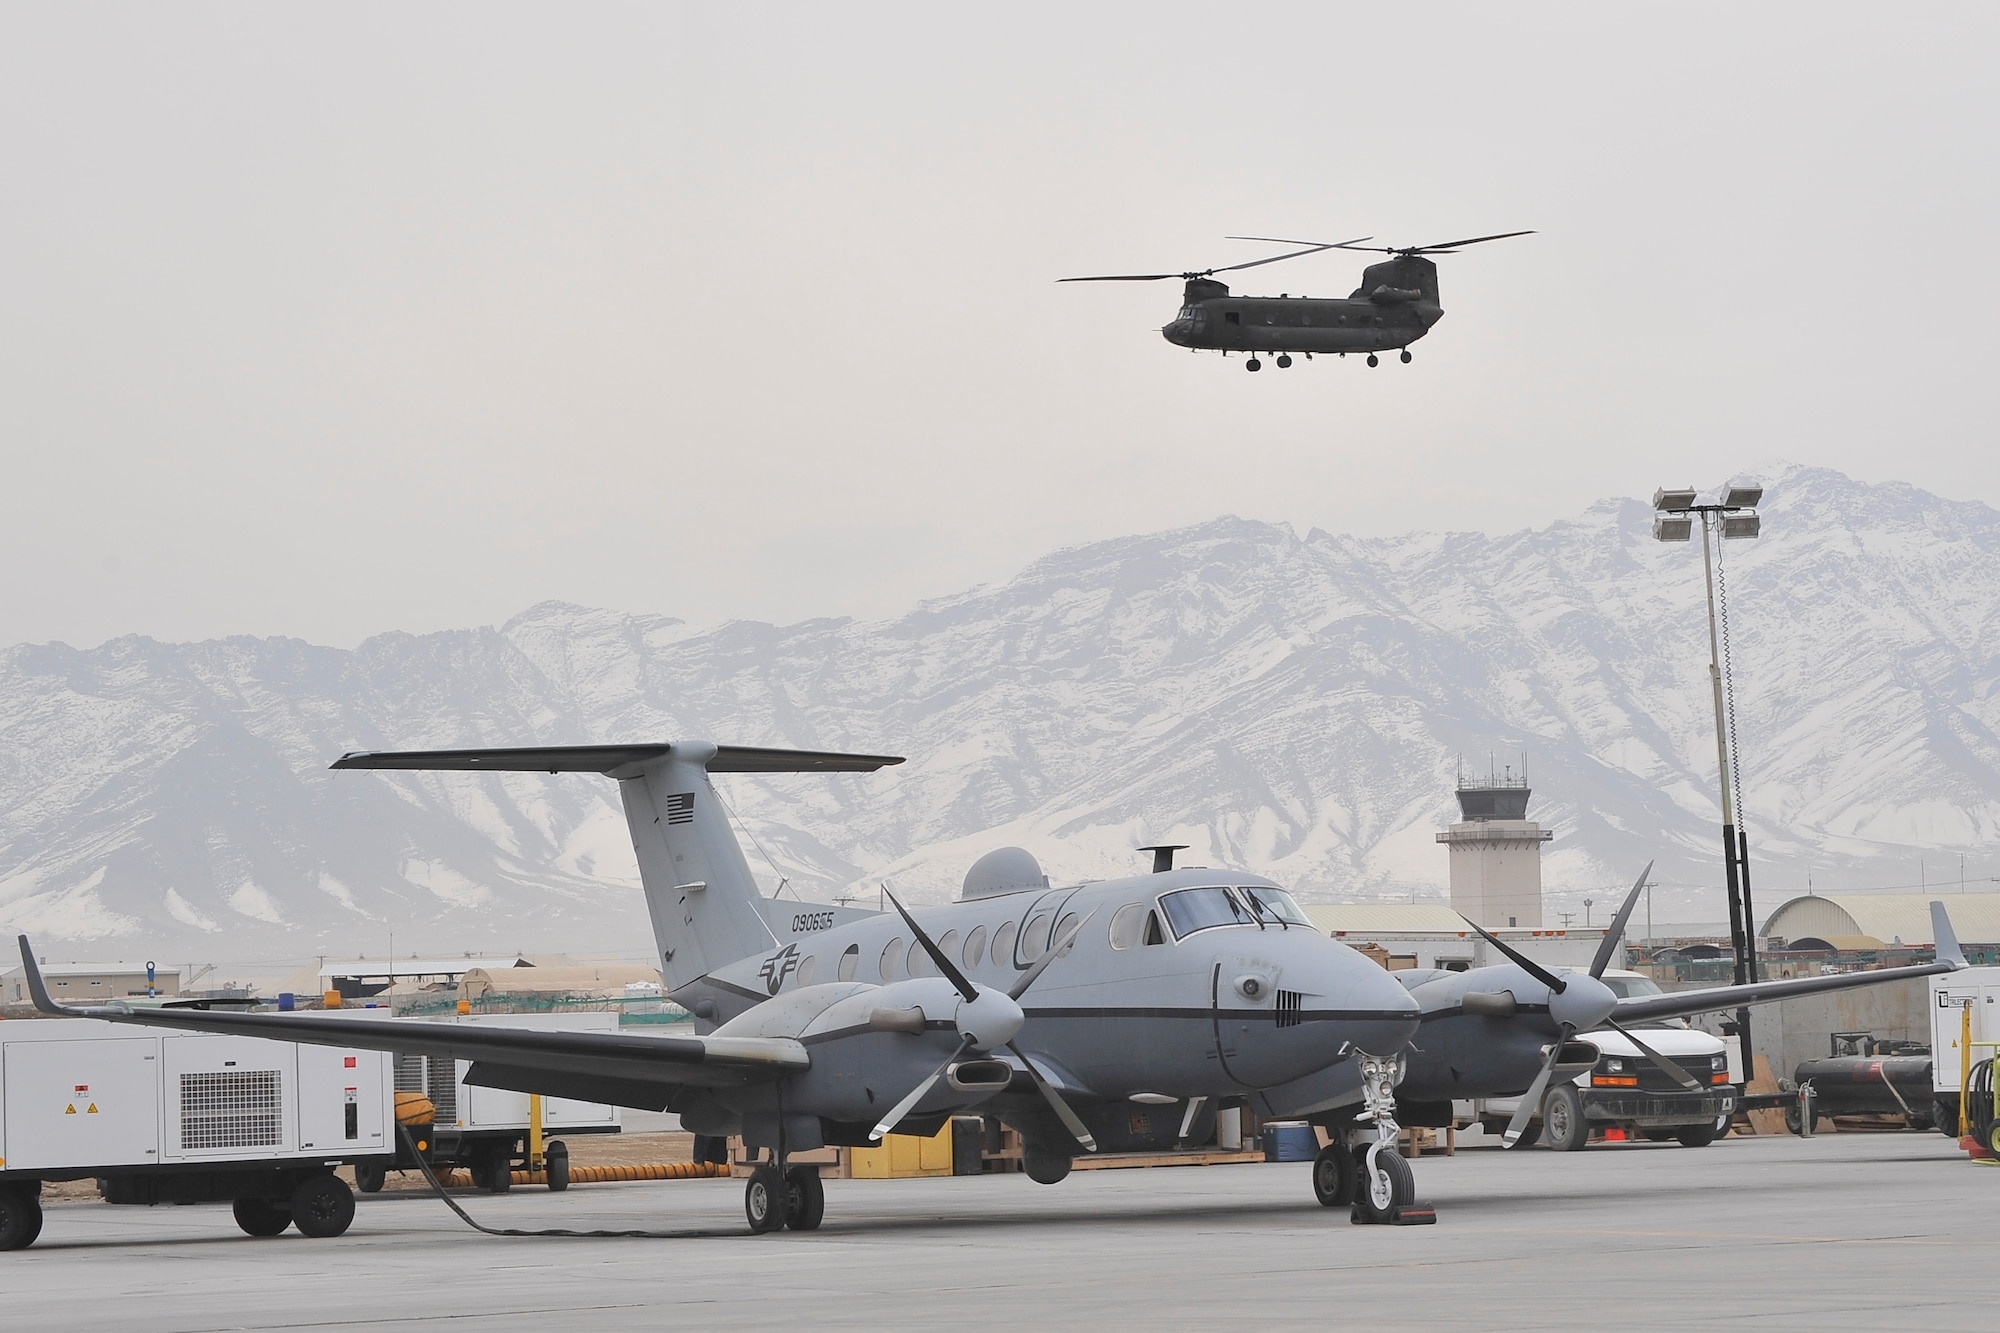 A MC-12 Liberty sits on the apron at Bagram Airfield, Afghanistan, while a CH-47 Chinook takes off.  The MC-12 provides intelligence, surveillance and reconnaissance support directly to ground forces. 